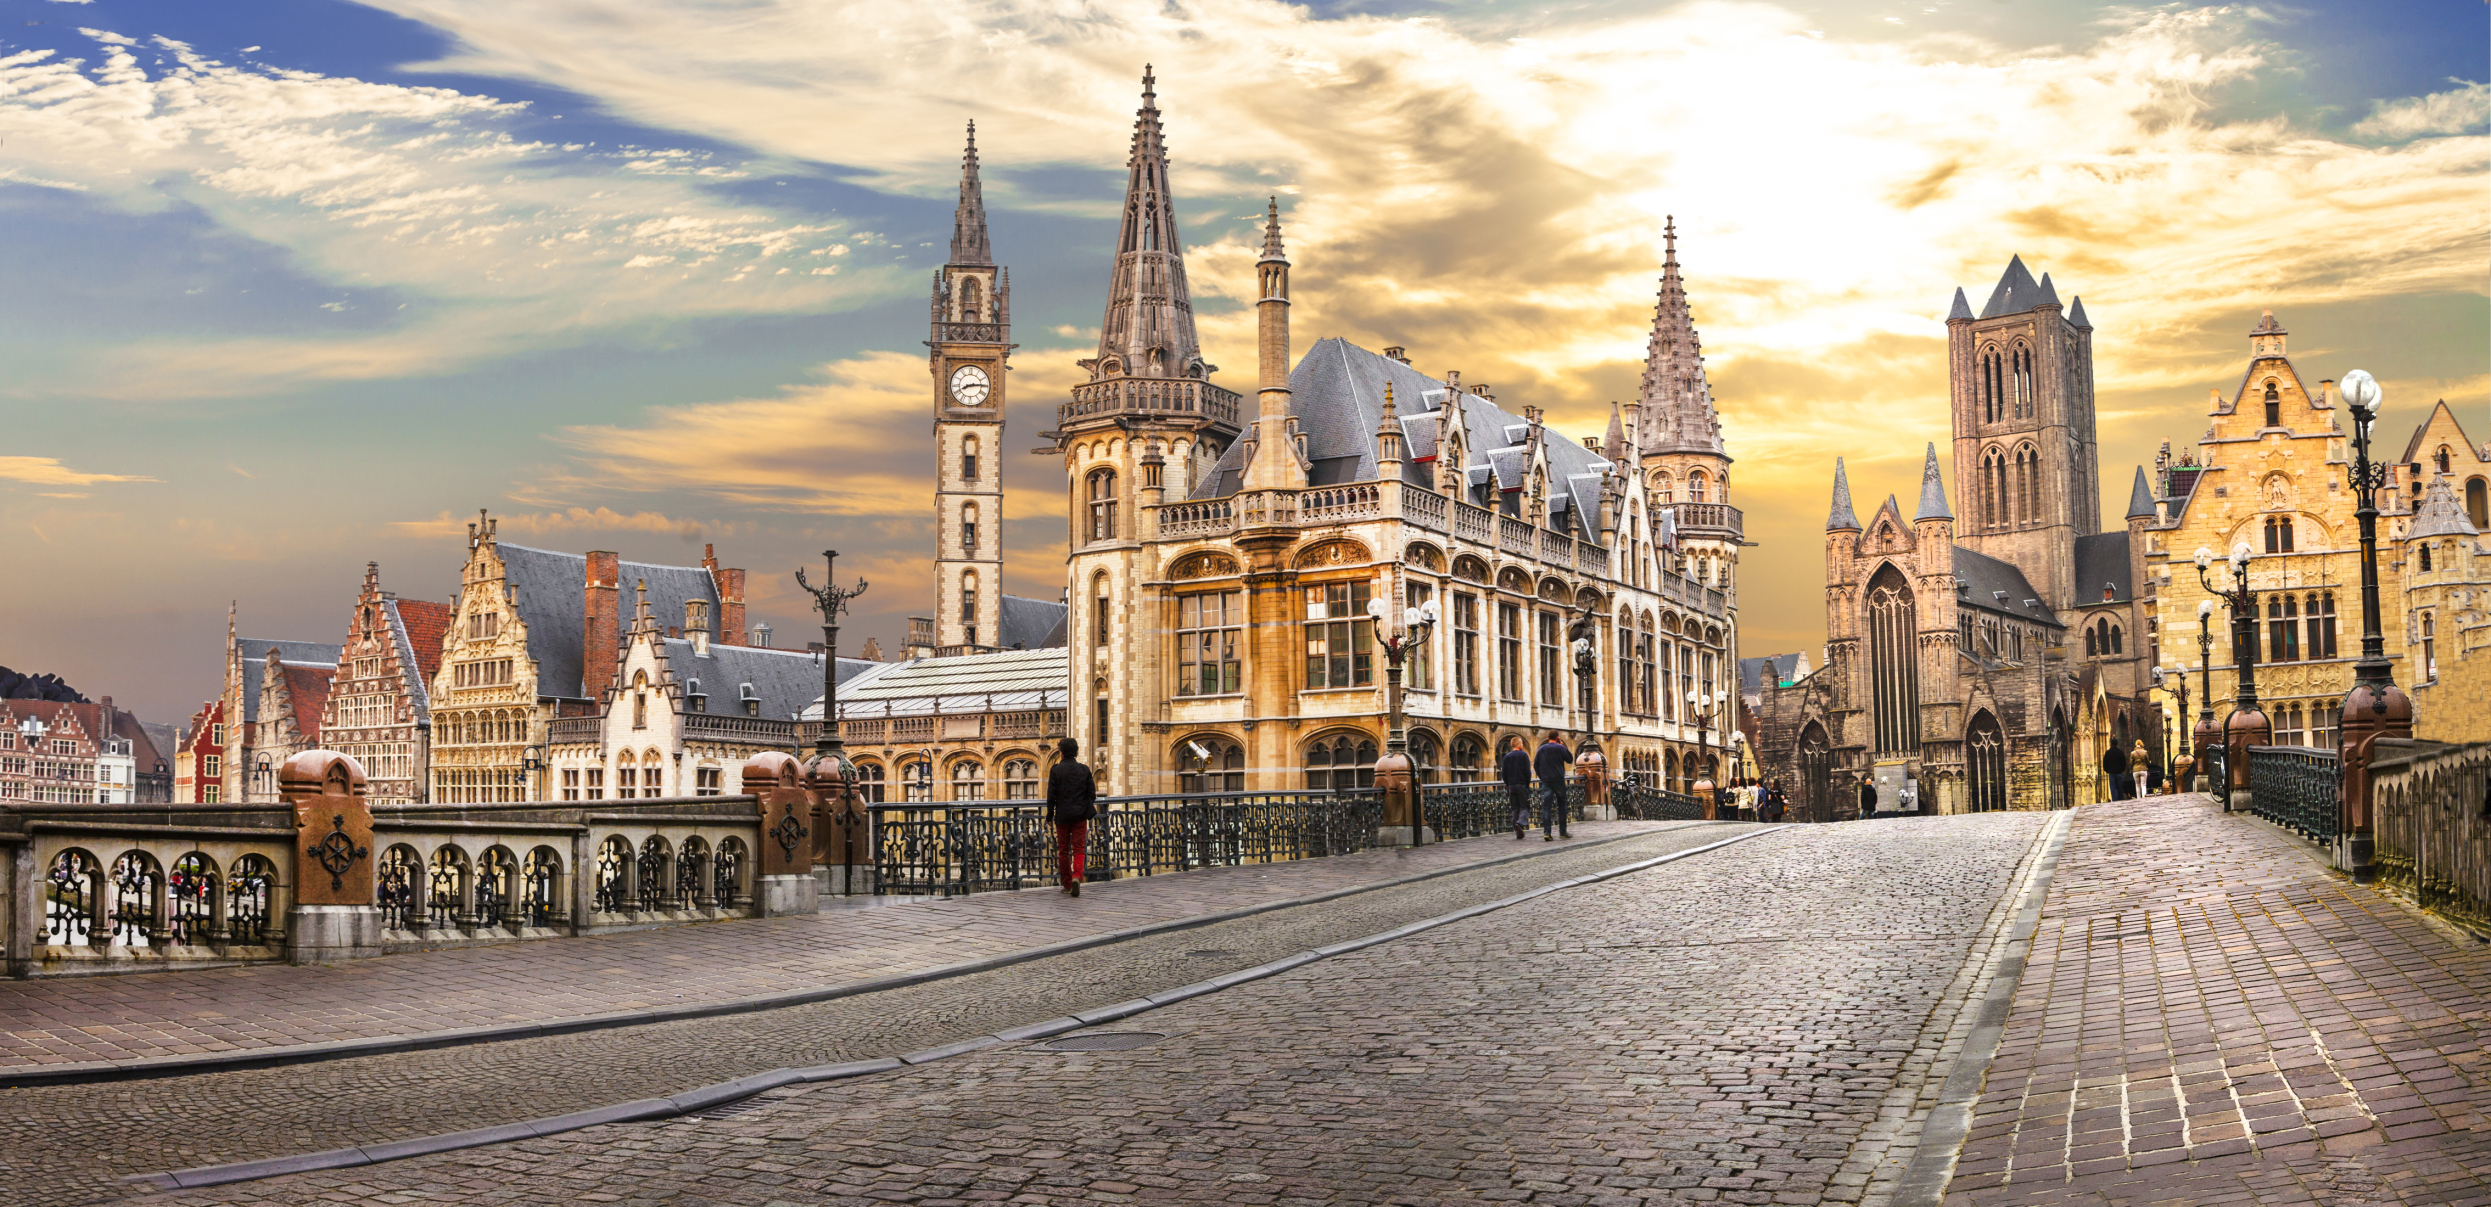 Nice Images Collection: Ghent Desktop Wallpapers